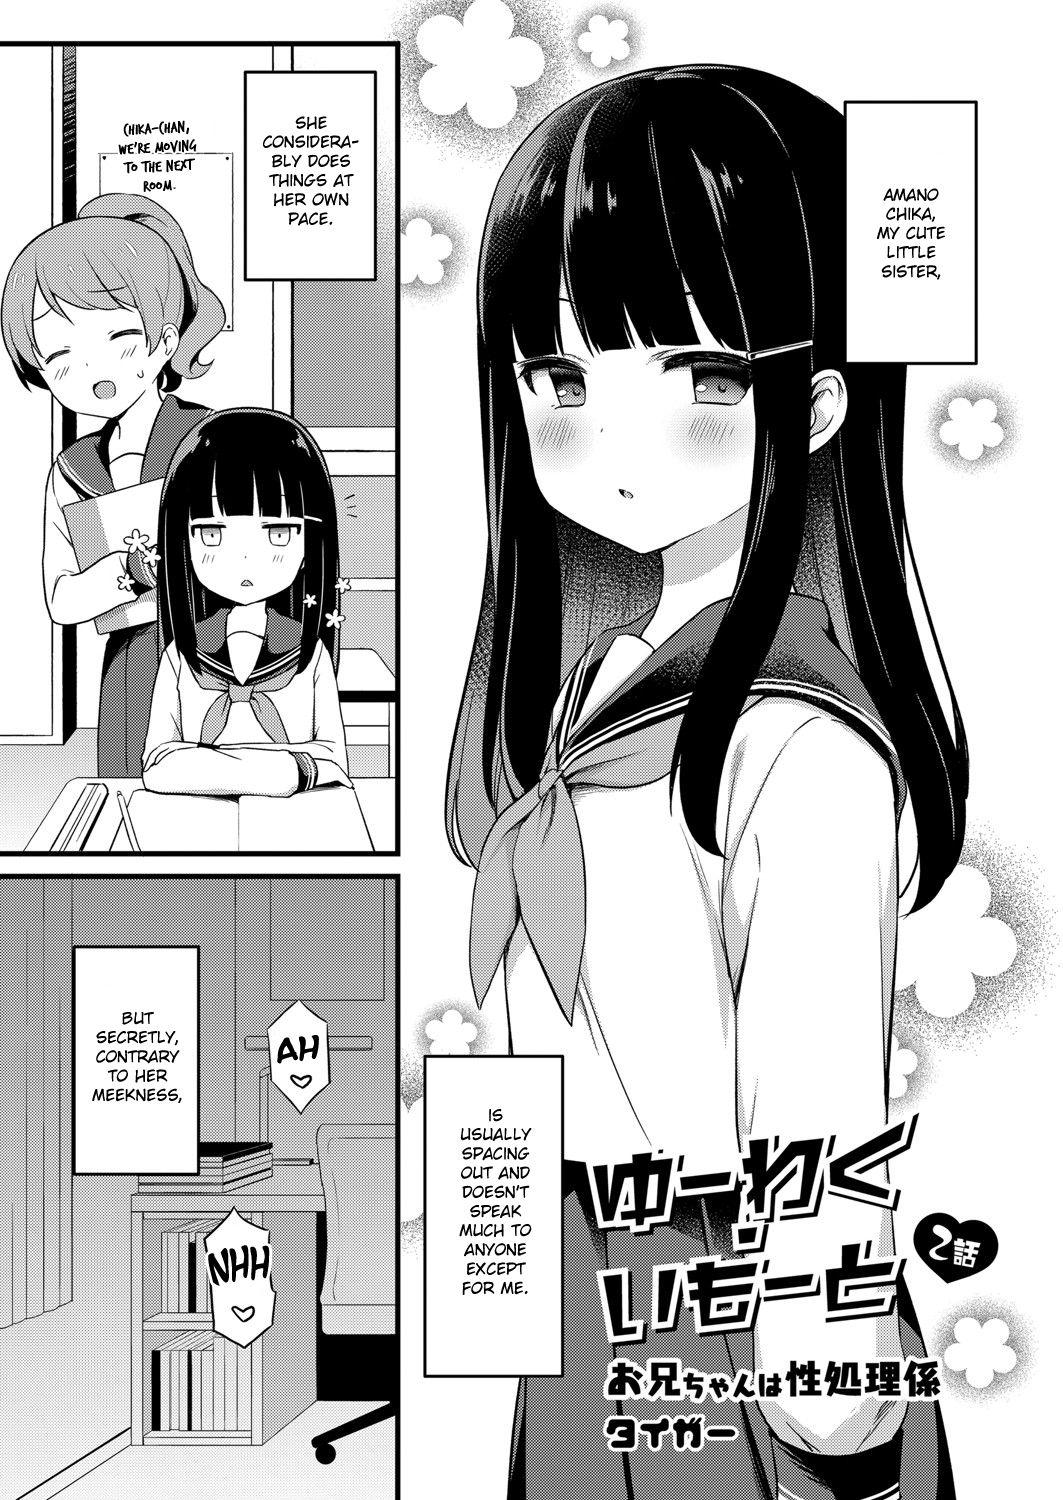 Orgasms [Tiger] Yuuwaku・Imouto #2 Onii-chan wa seishori gakari | Little Sister Temptation #2 Onii-chan is in Charge of My Libido Management (COMIC Reboot Vol. 07) [English] [Digital] Thylinh - Picture 1